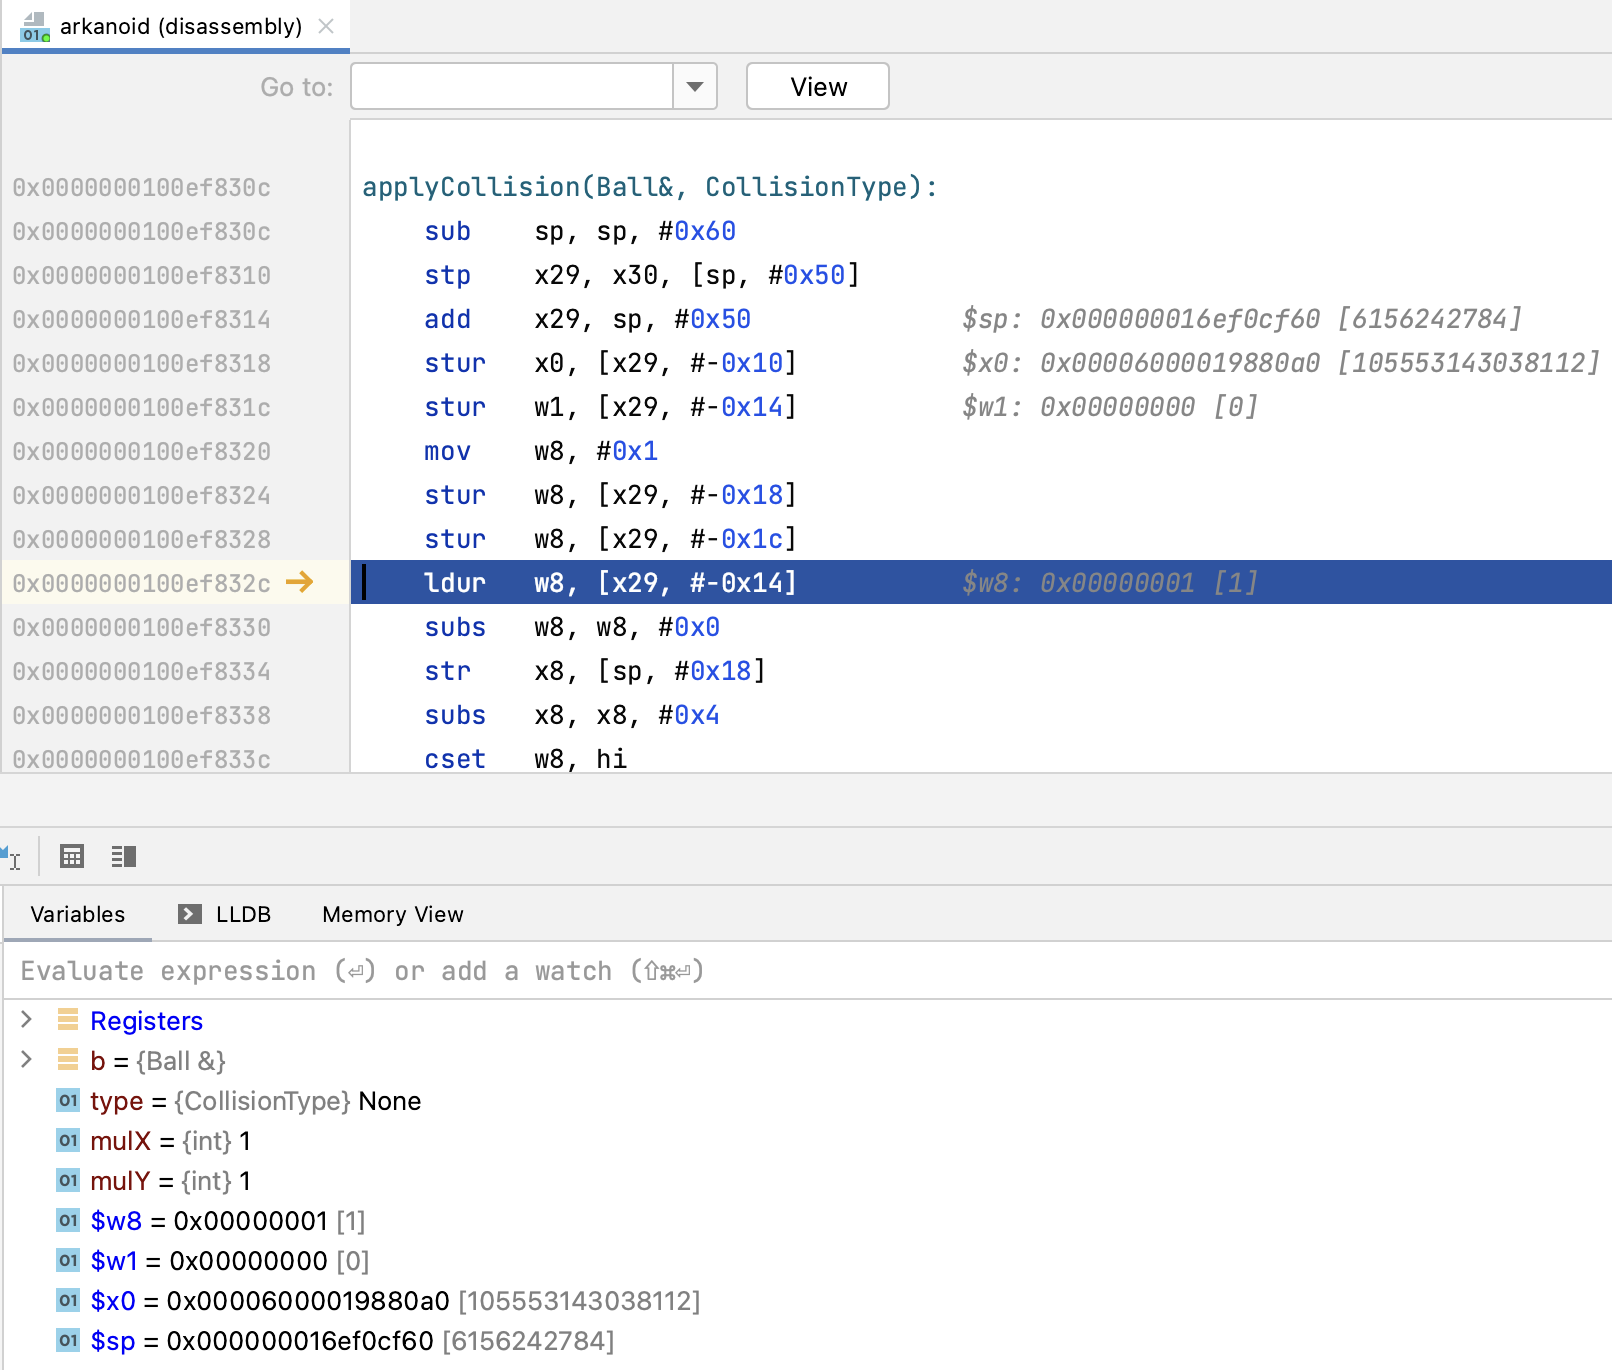 Registers node added in disassembly view